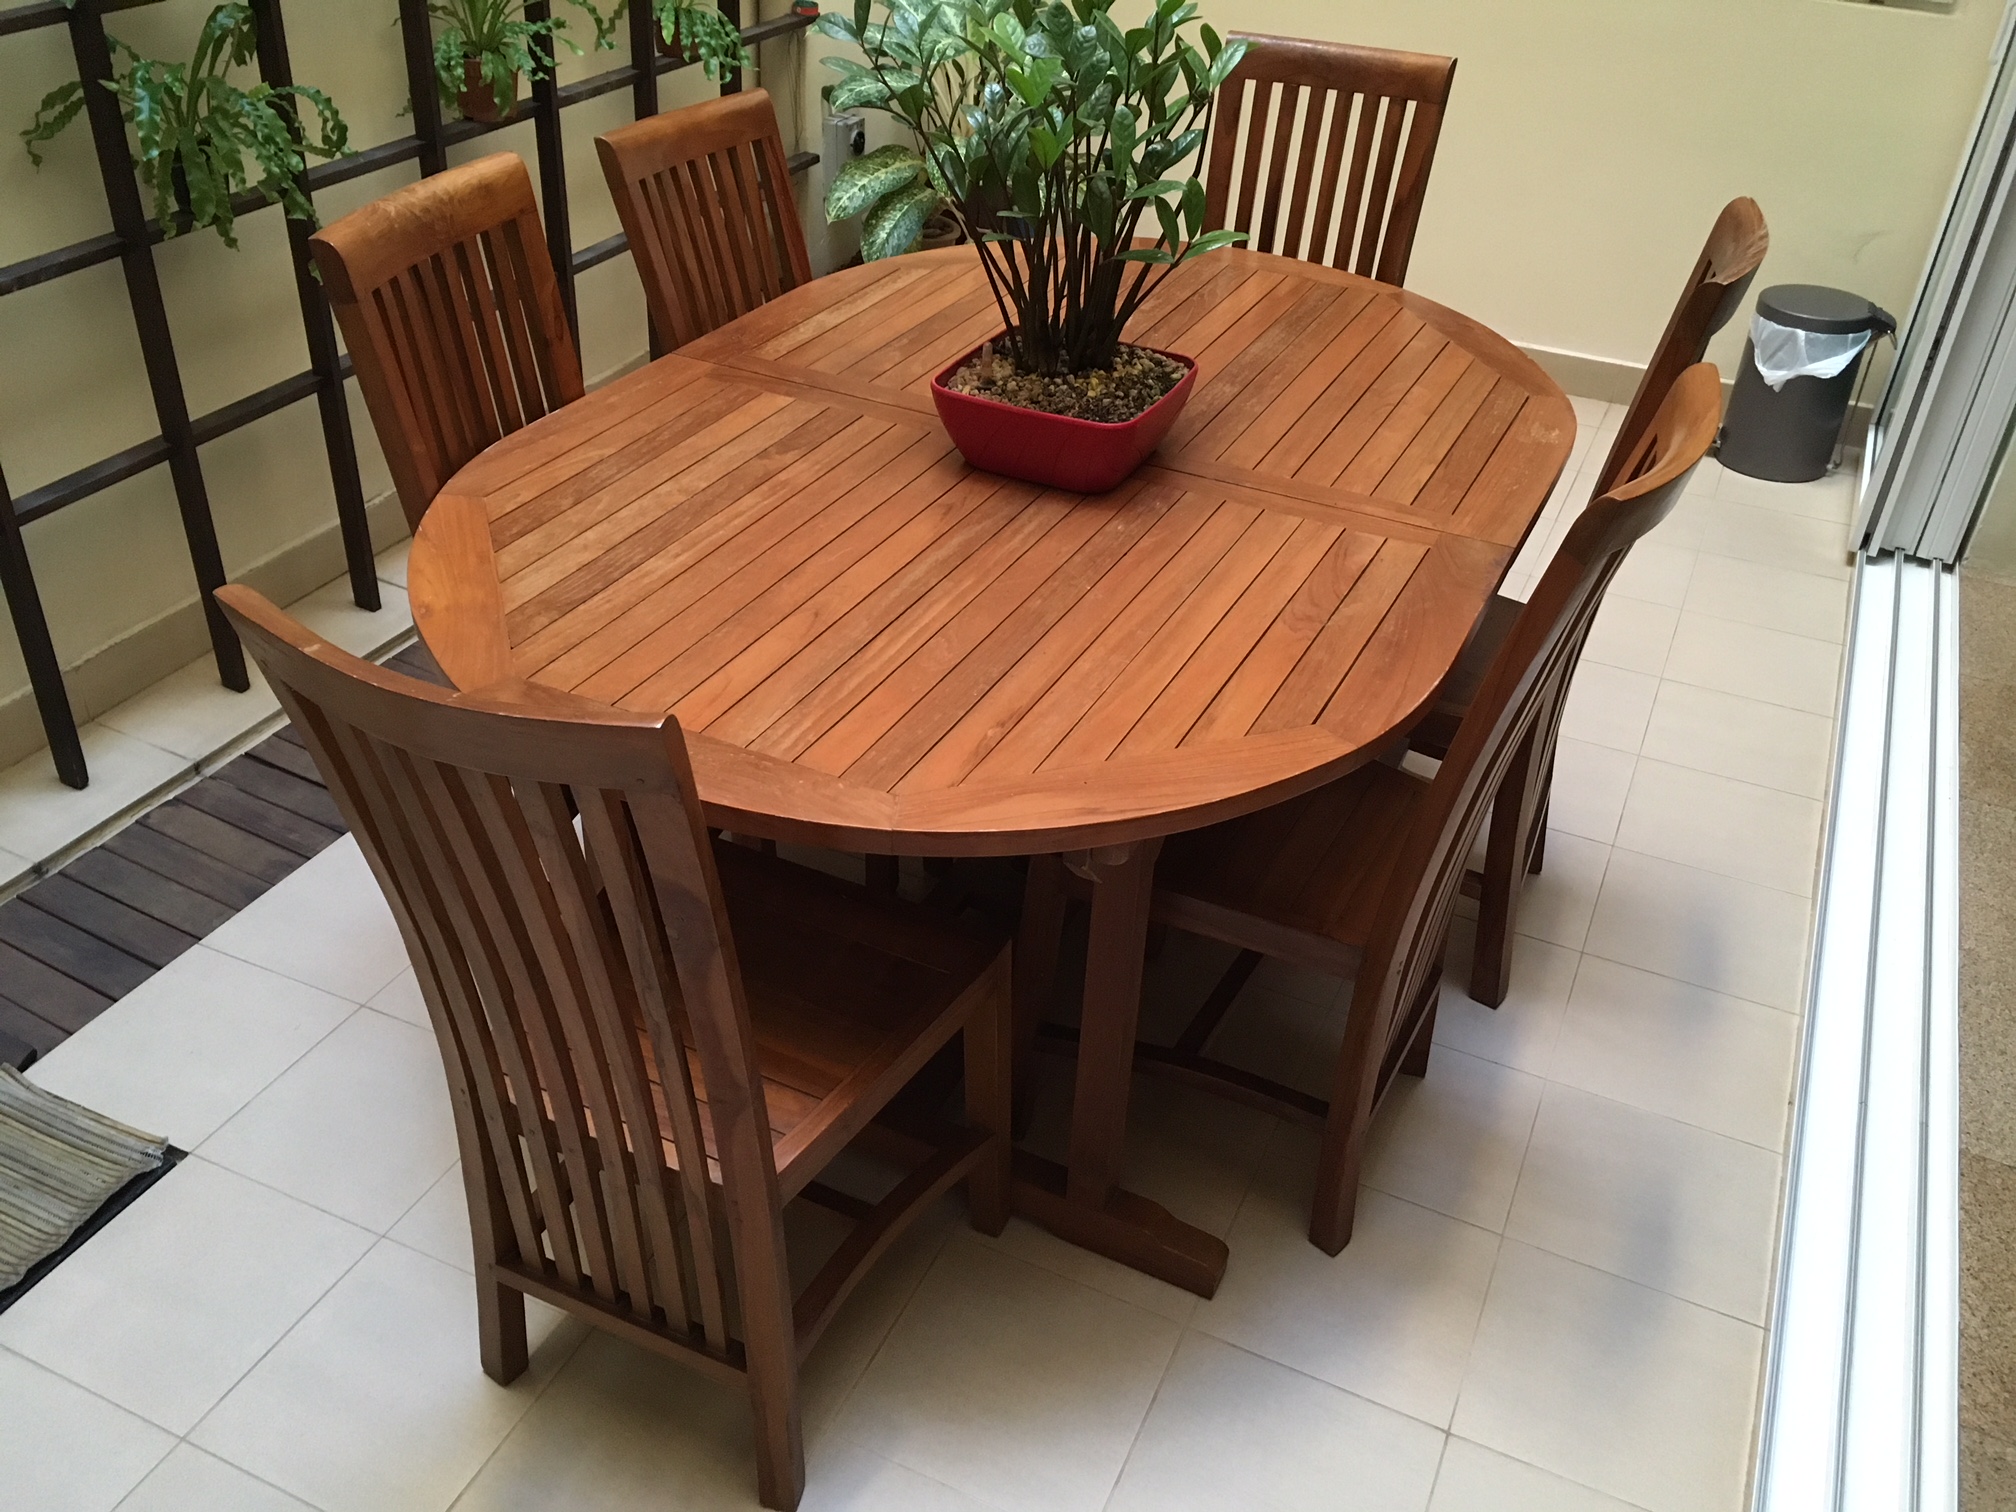 WTS: Used Wooden Teak Extendable Dining Table & 6 Chairs ...